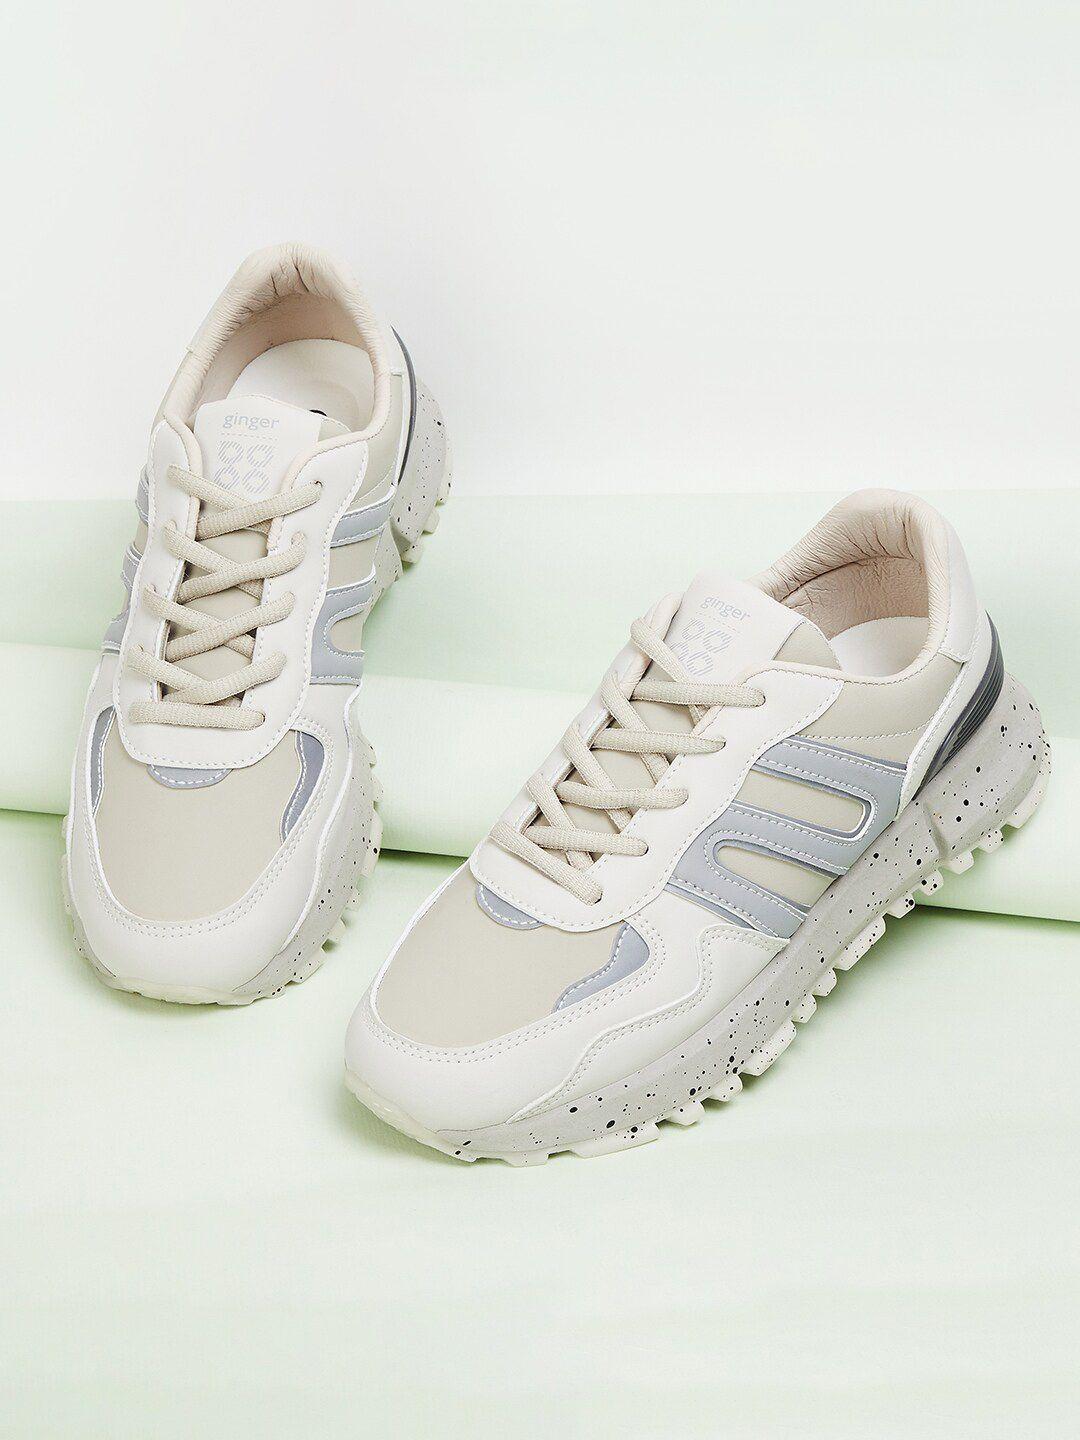 ginger-by-lifestyle-women-colourblocked-sneakers